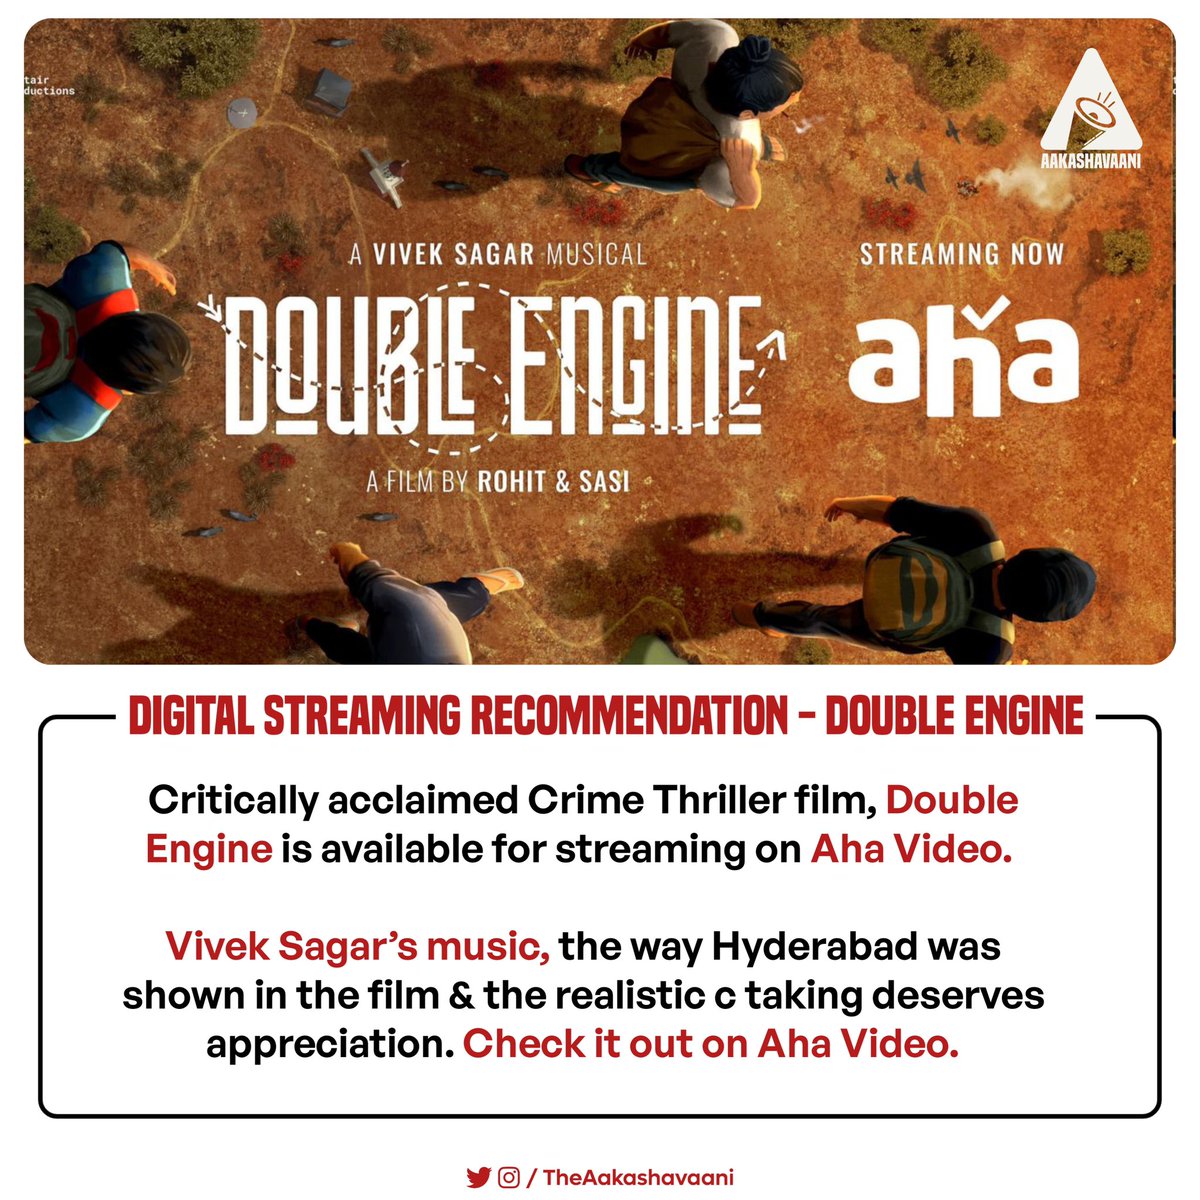 #DoubleEngine - Check it out on Aha Video